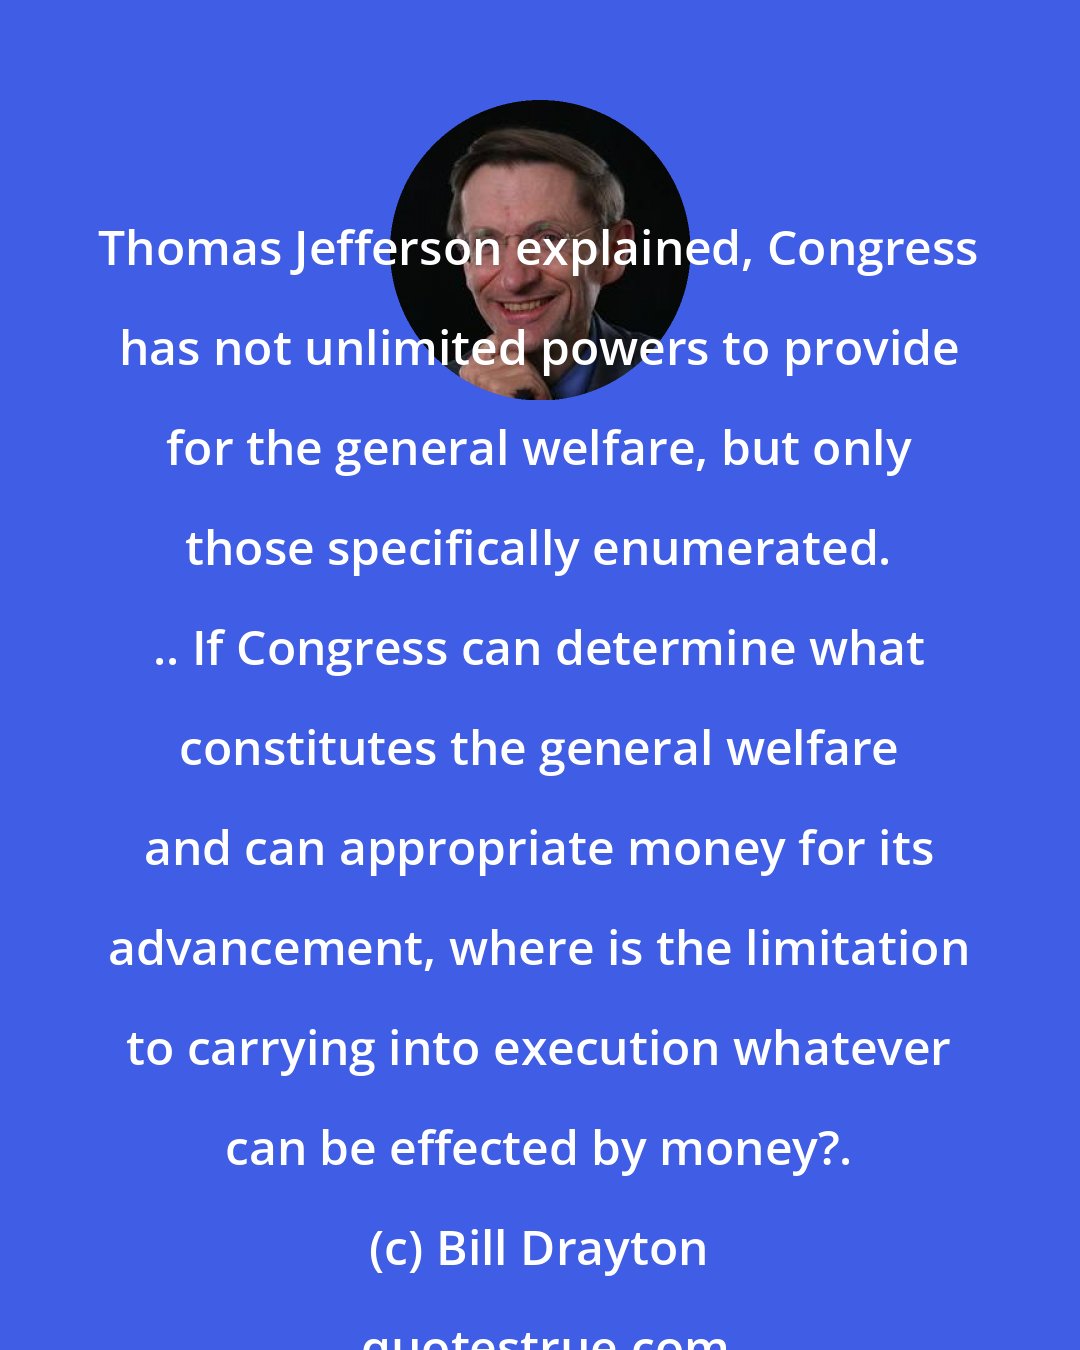 Bill Drayton: Thomas Jefferson explained, Congress has not unlimited powers to provide for the general welfare, but only those specifically enumerated. .. If Congress can determine what constitutes the general welfare and can appropriate money for its advancement, where is the limitation to carrying into execution whatever can be effected by money?.